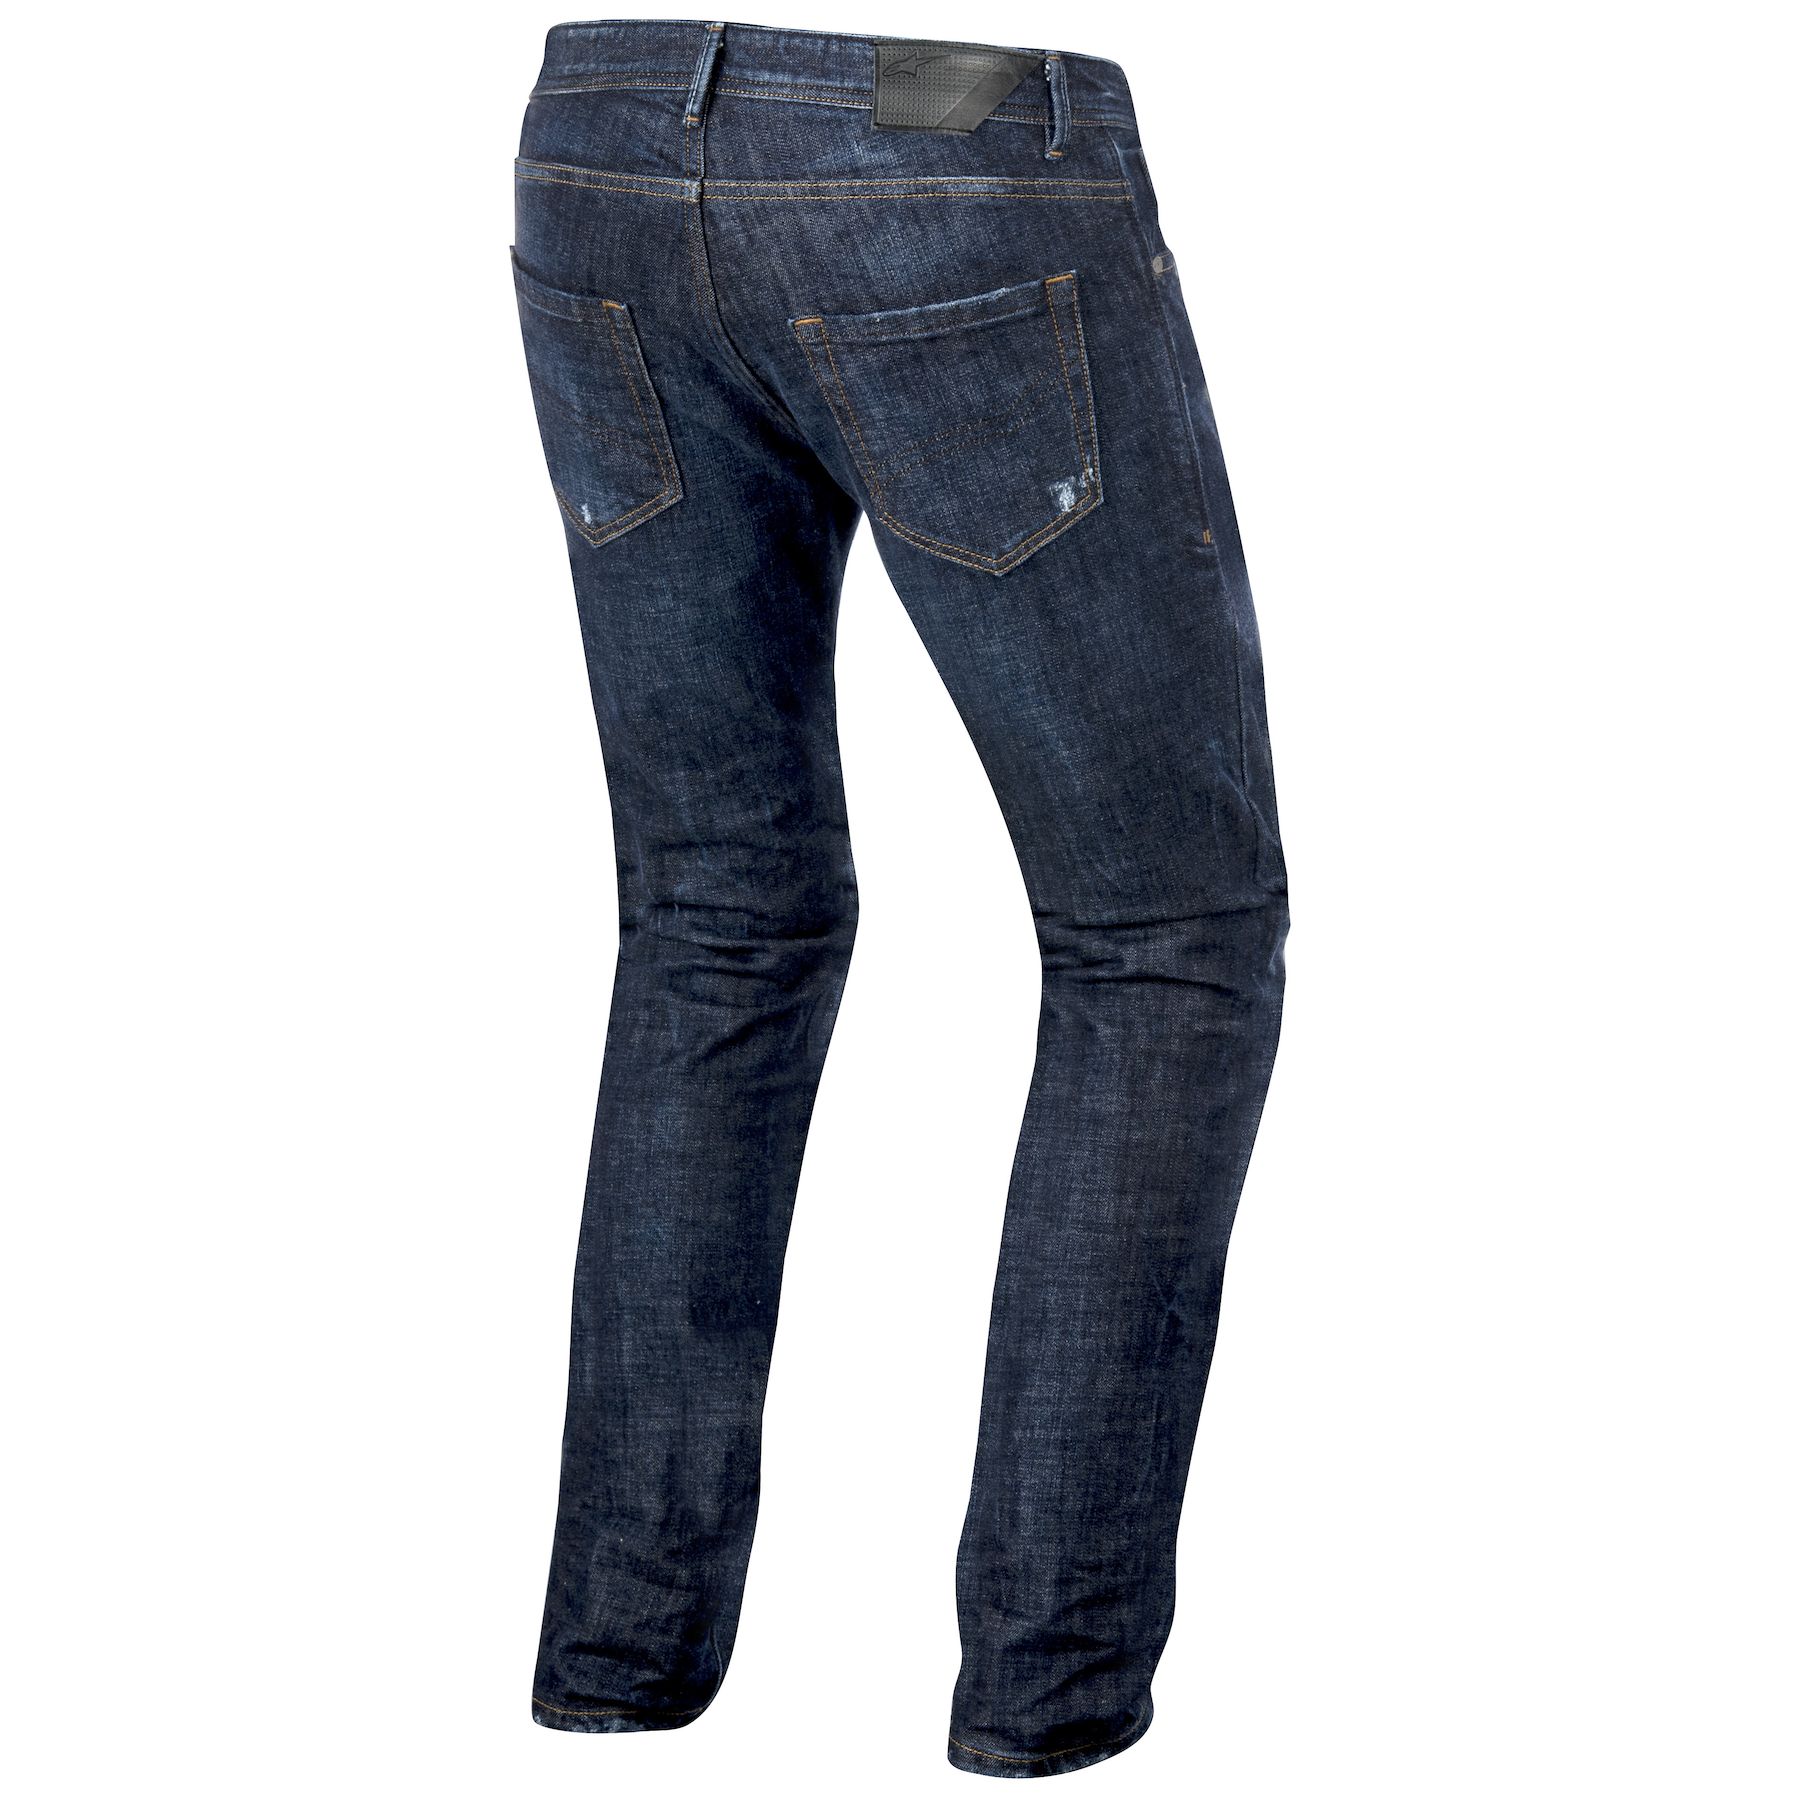 skyring Riding Jeans Pant Price in India - Buy skyring Riding Jeans Pant  online at Flipkart.com